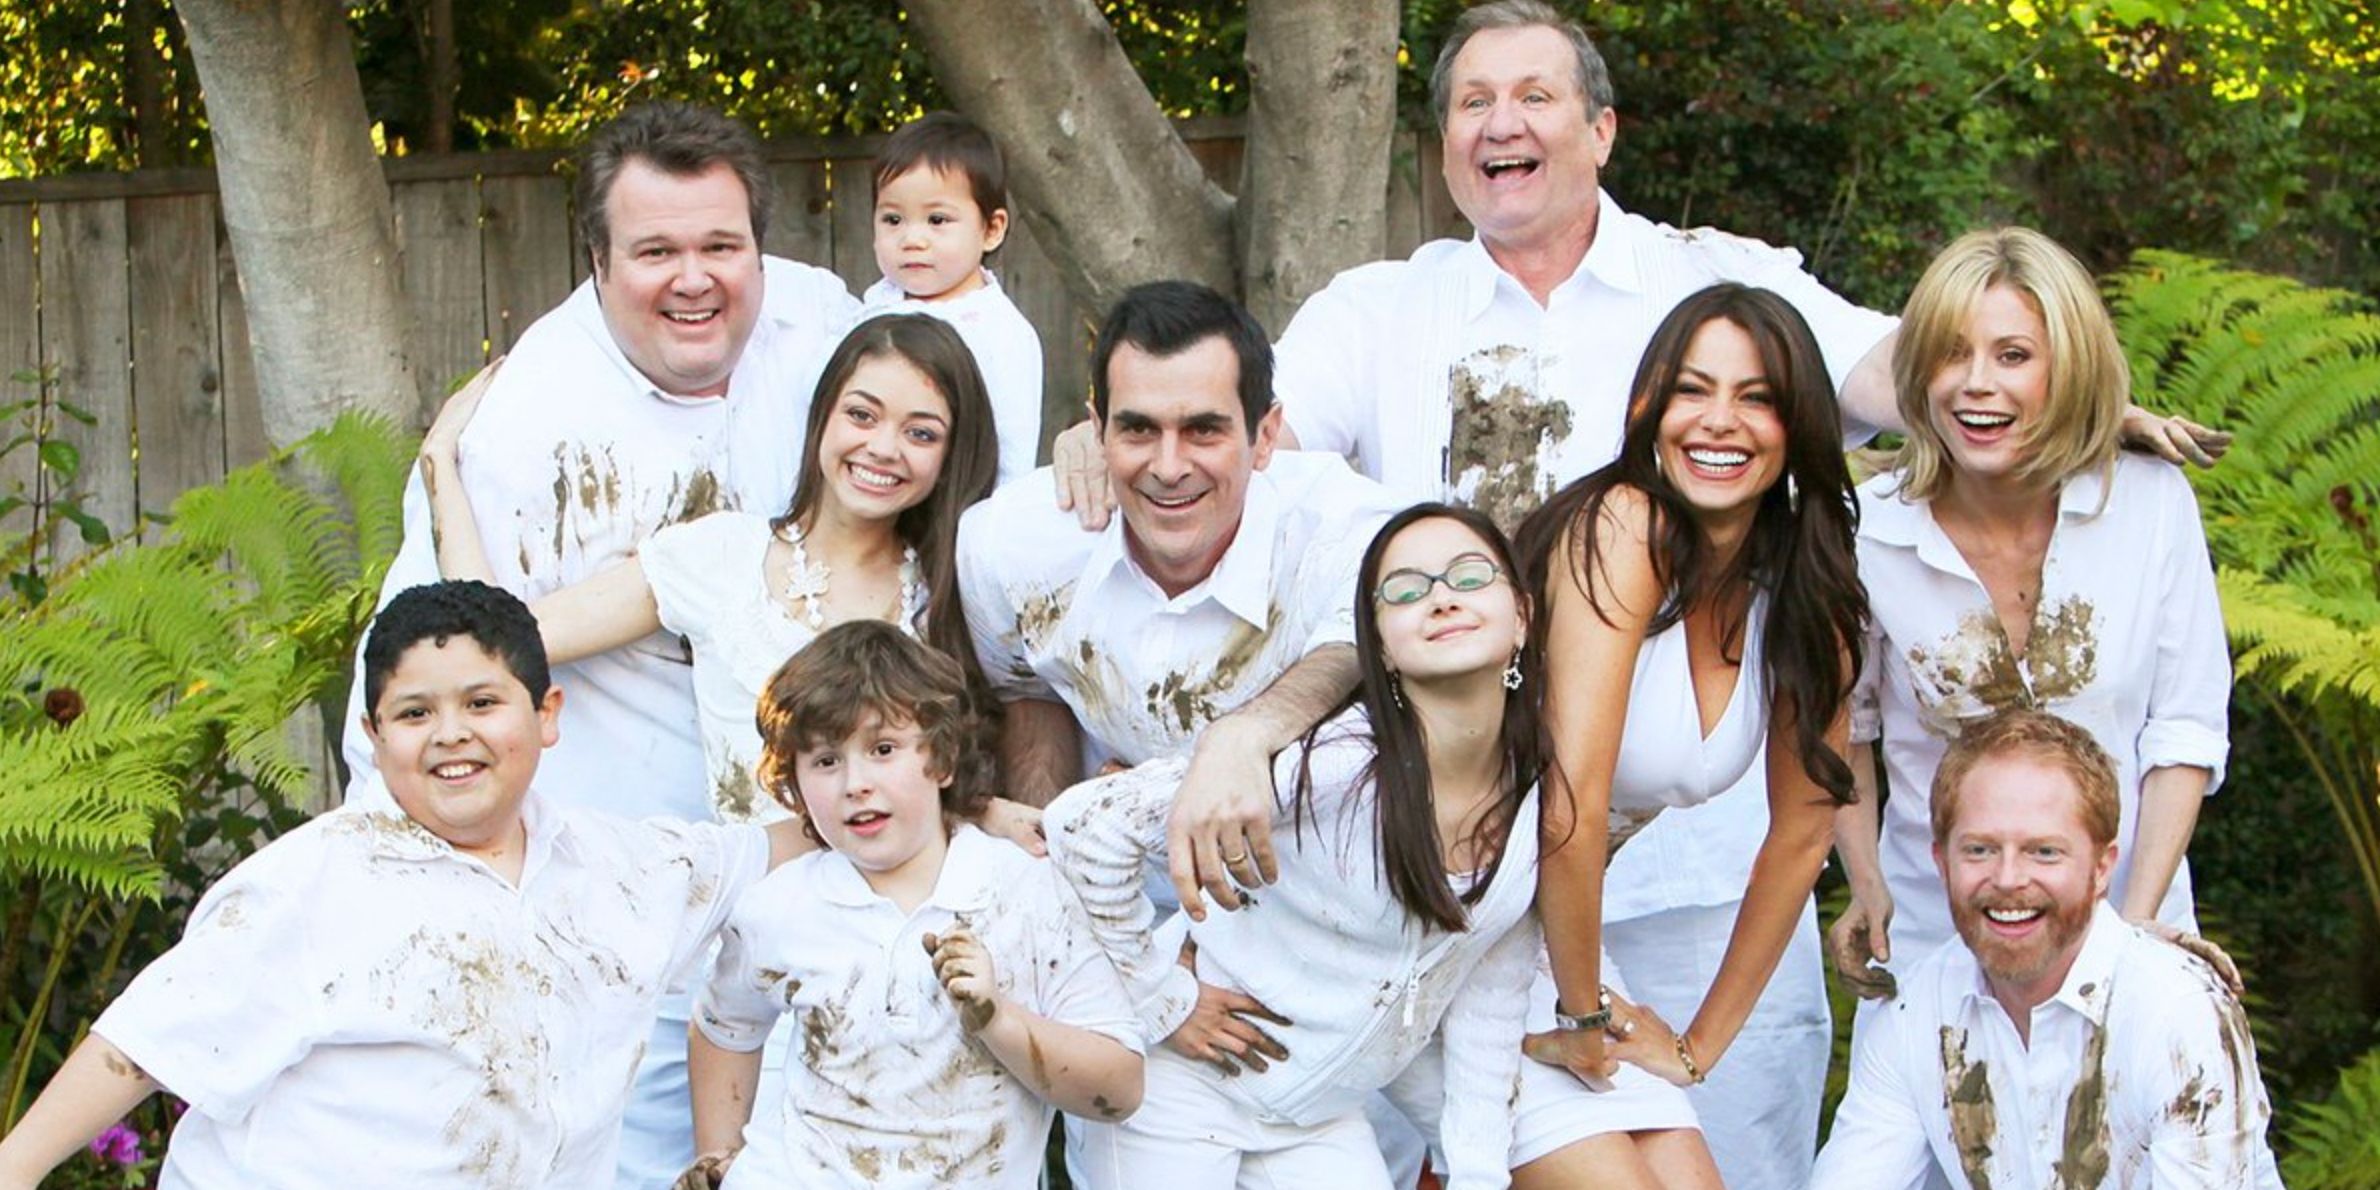 The Modern Family Cast All In White In Season 1 Posing For A Photo With Dirt On Their Clothes 